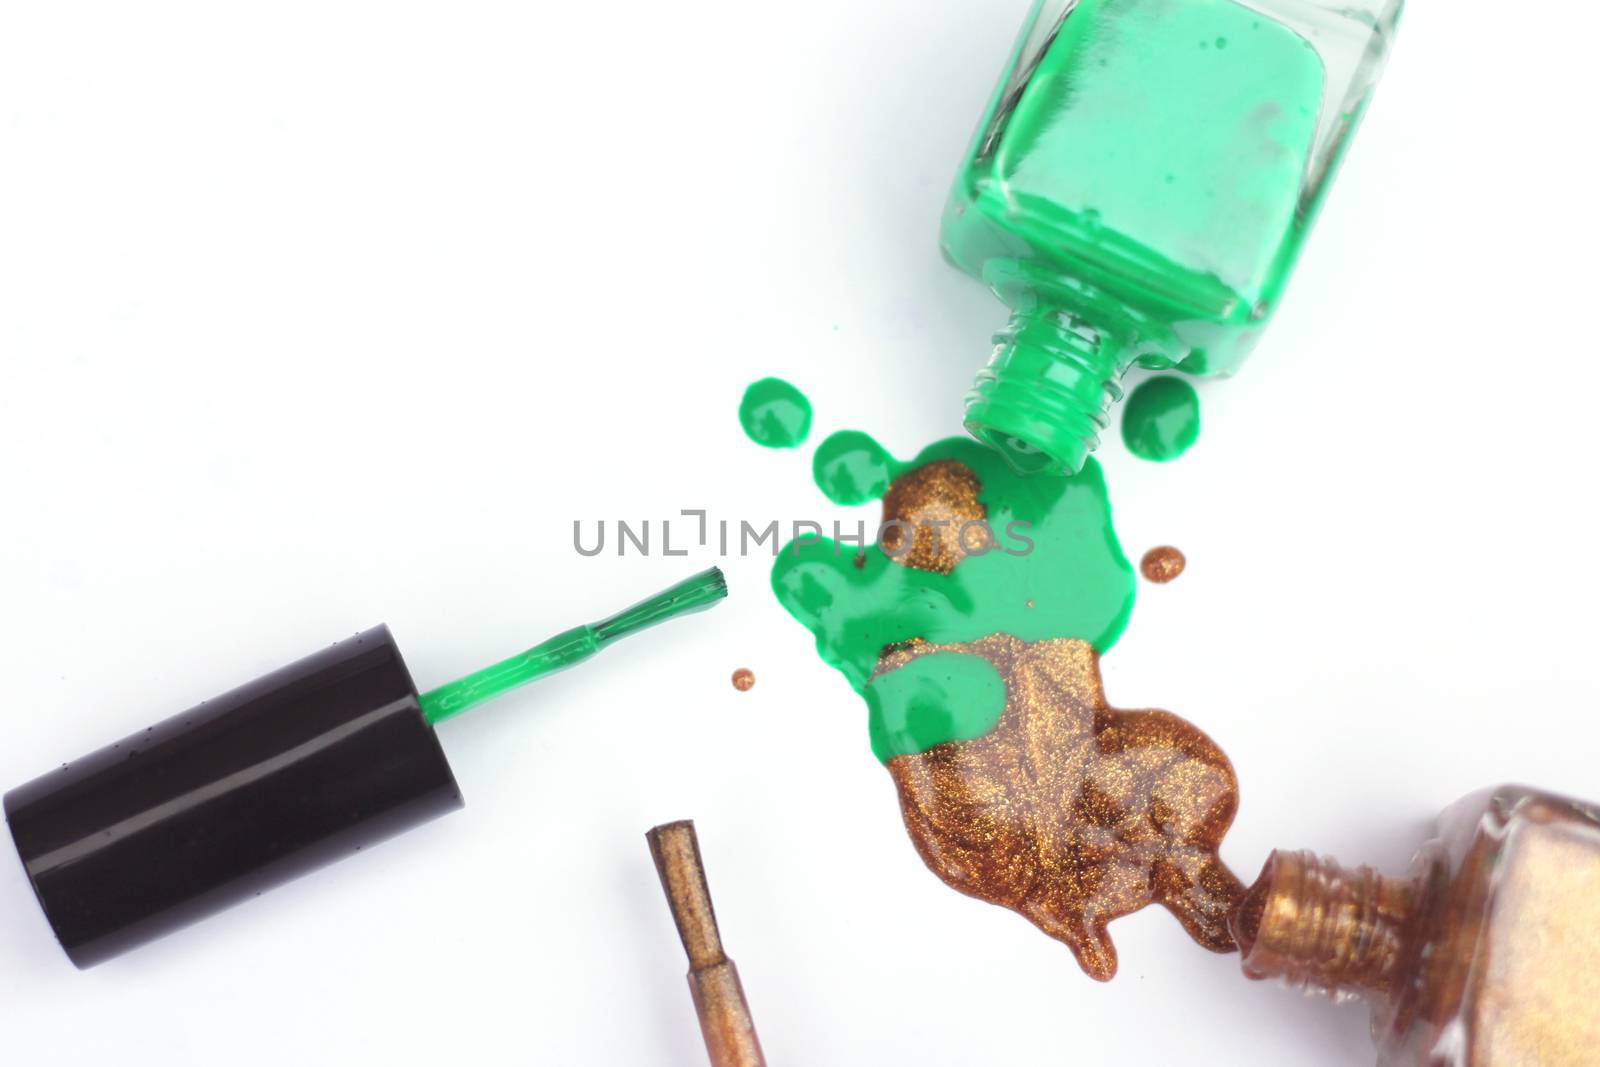 Green and Gold Nail polish  Spilled on White by Marti157900